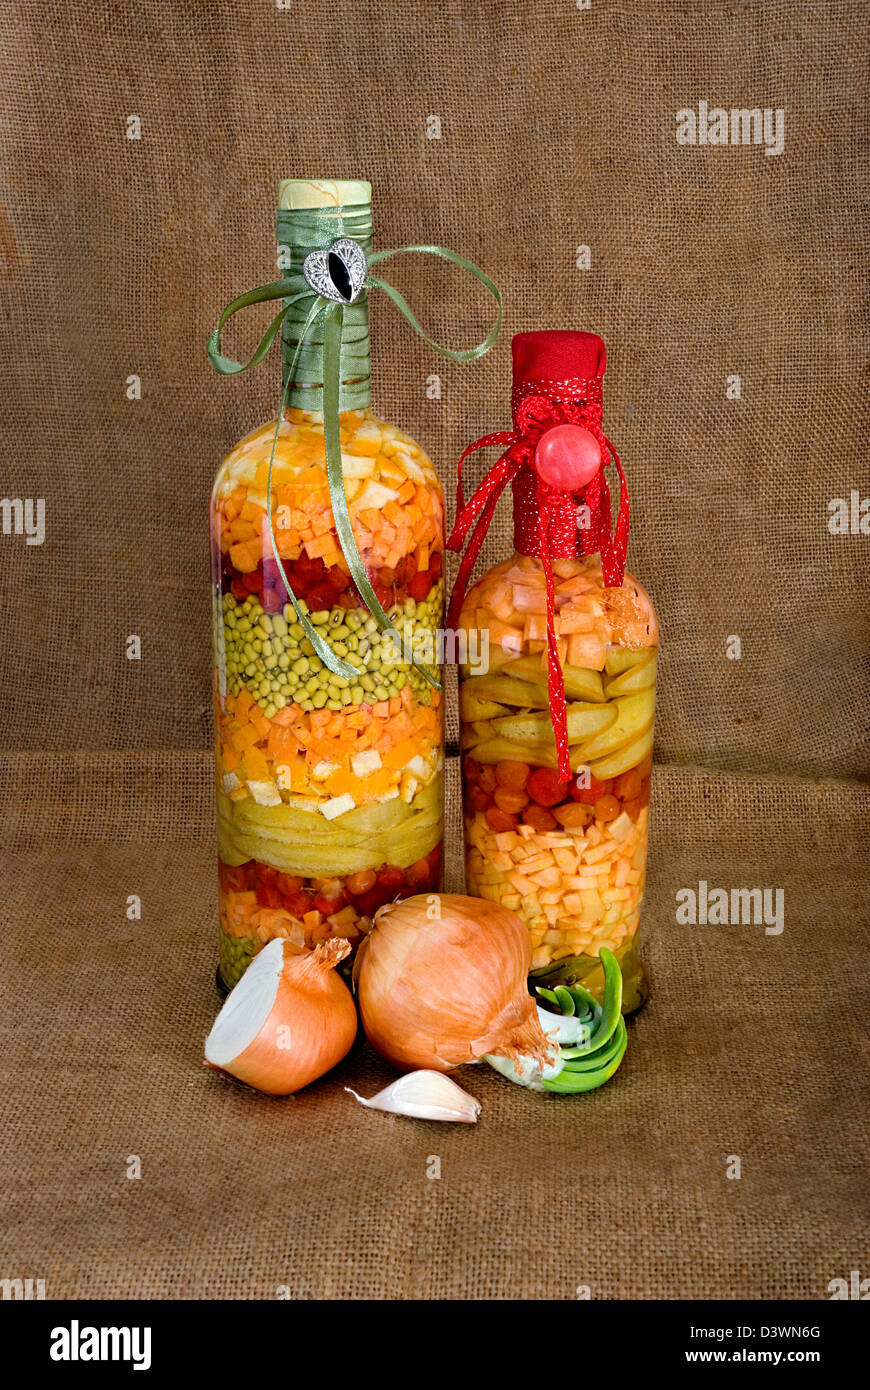 Onions, garlic and two bottles with tinned vegetables Stock Photo